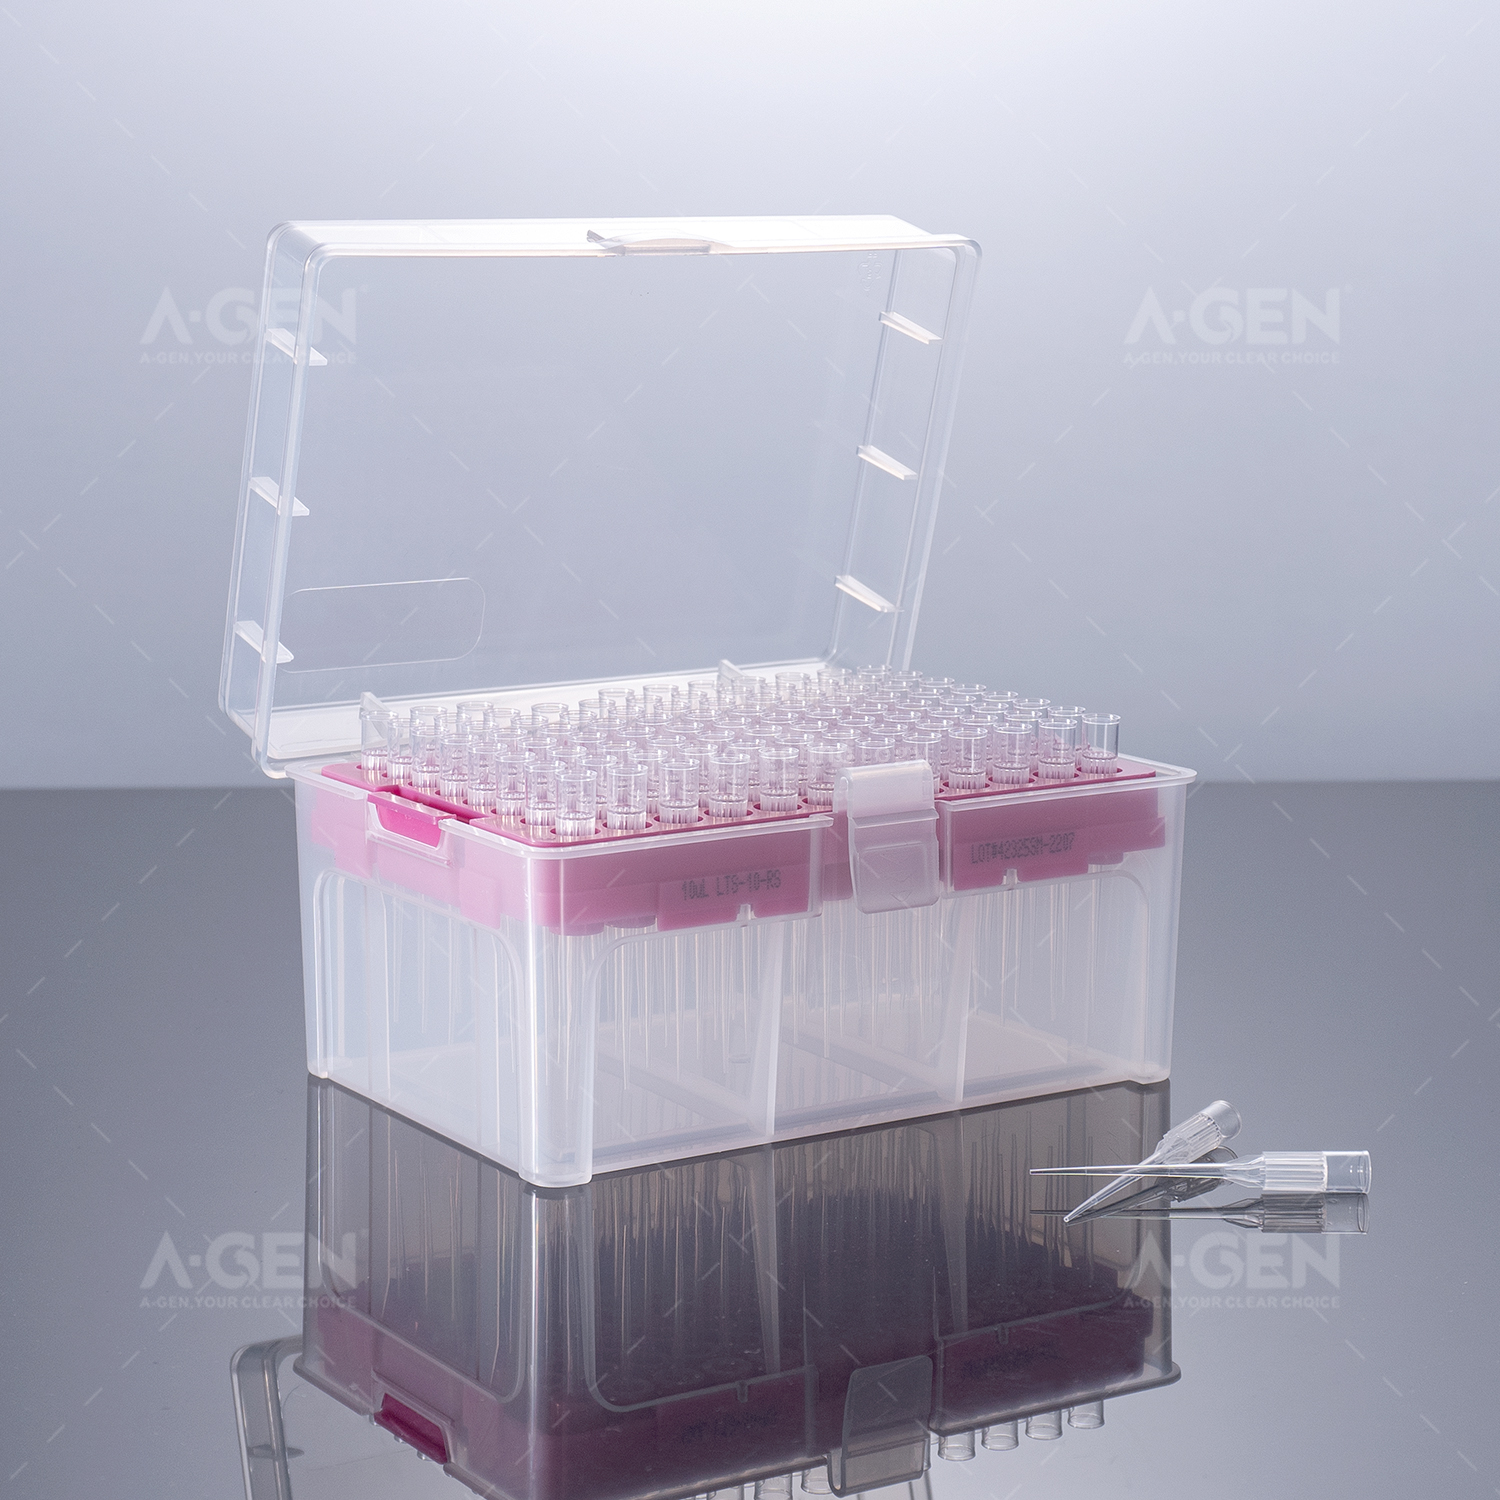 Rainin low retention 10uL transparent midsci pipette tips with Eco space safe package 